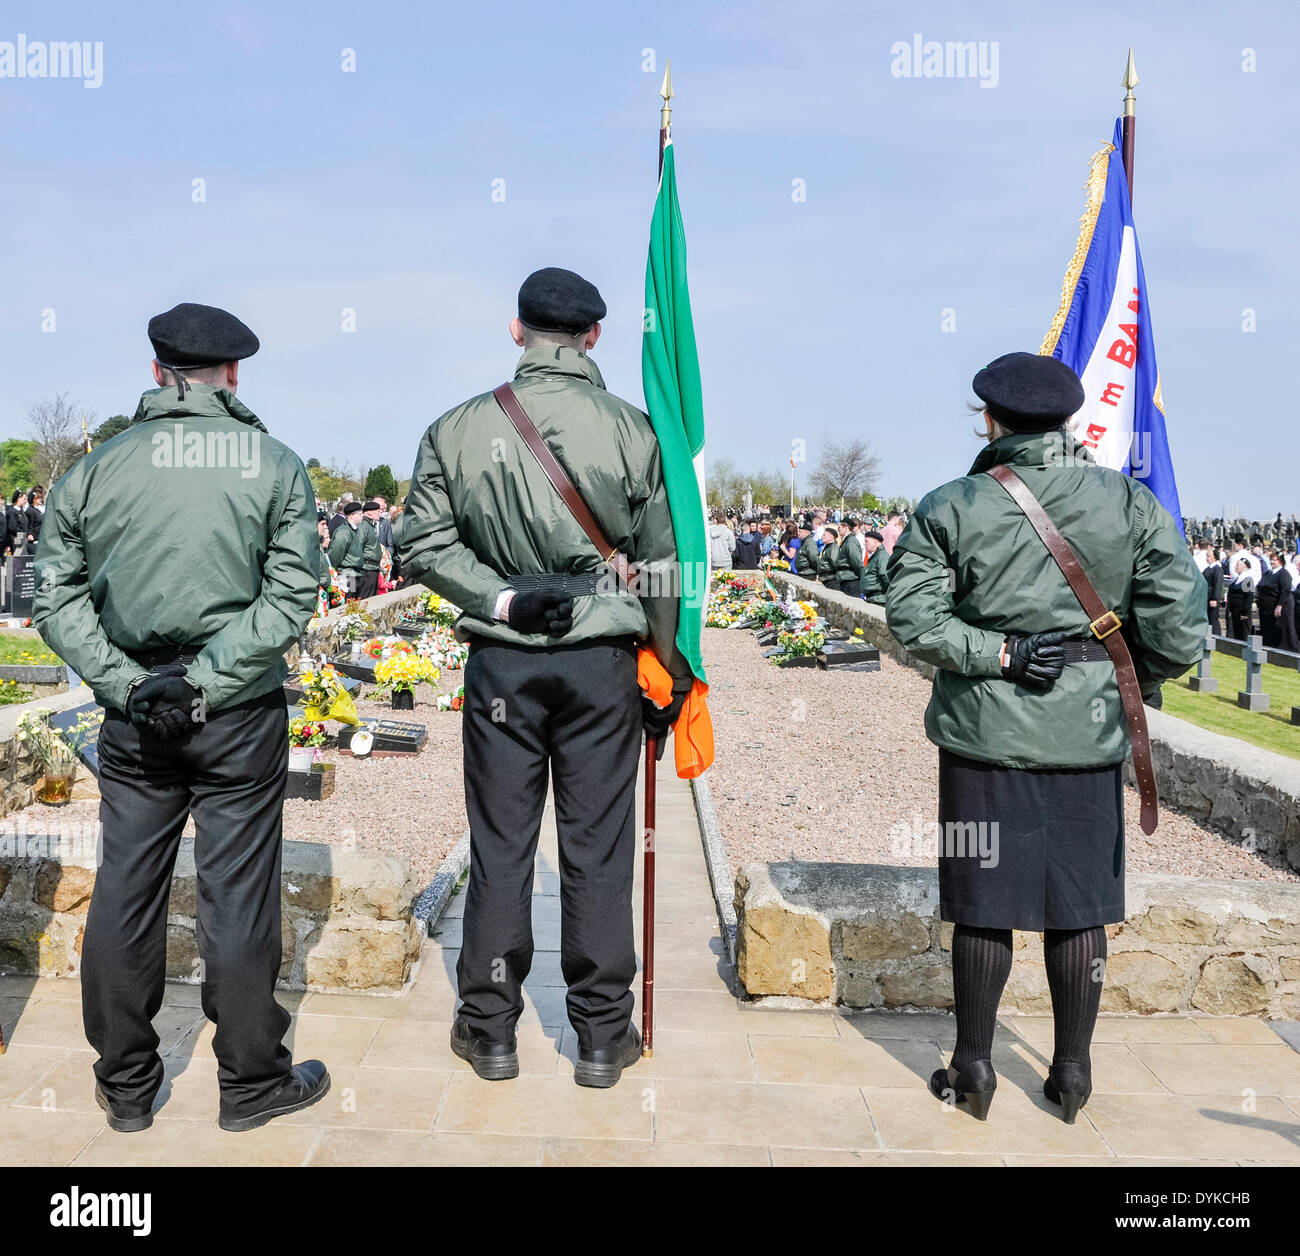 Irish Republicans gather at the IRA Antrim burial plot to remember the IRA volunteers who died during the troubles, during the Easter Rising commemeration parade. Stock Photo